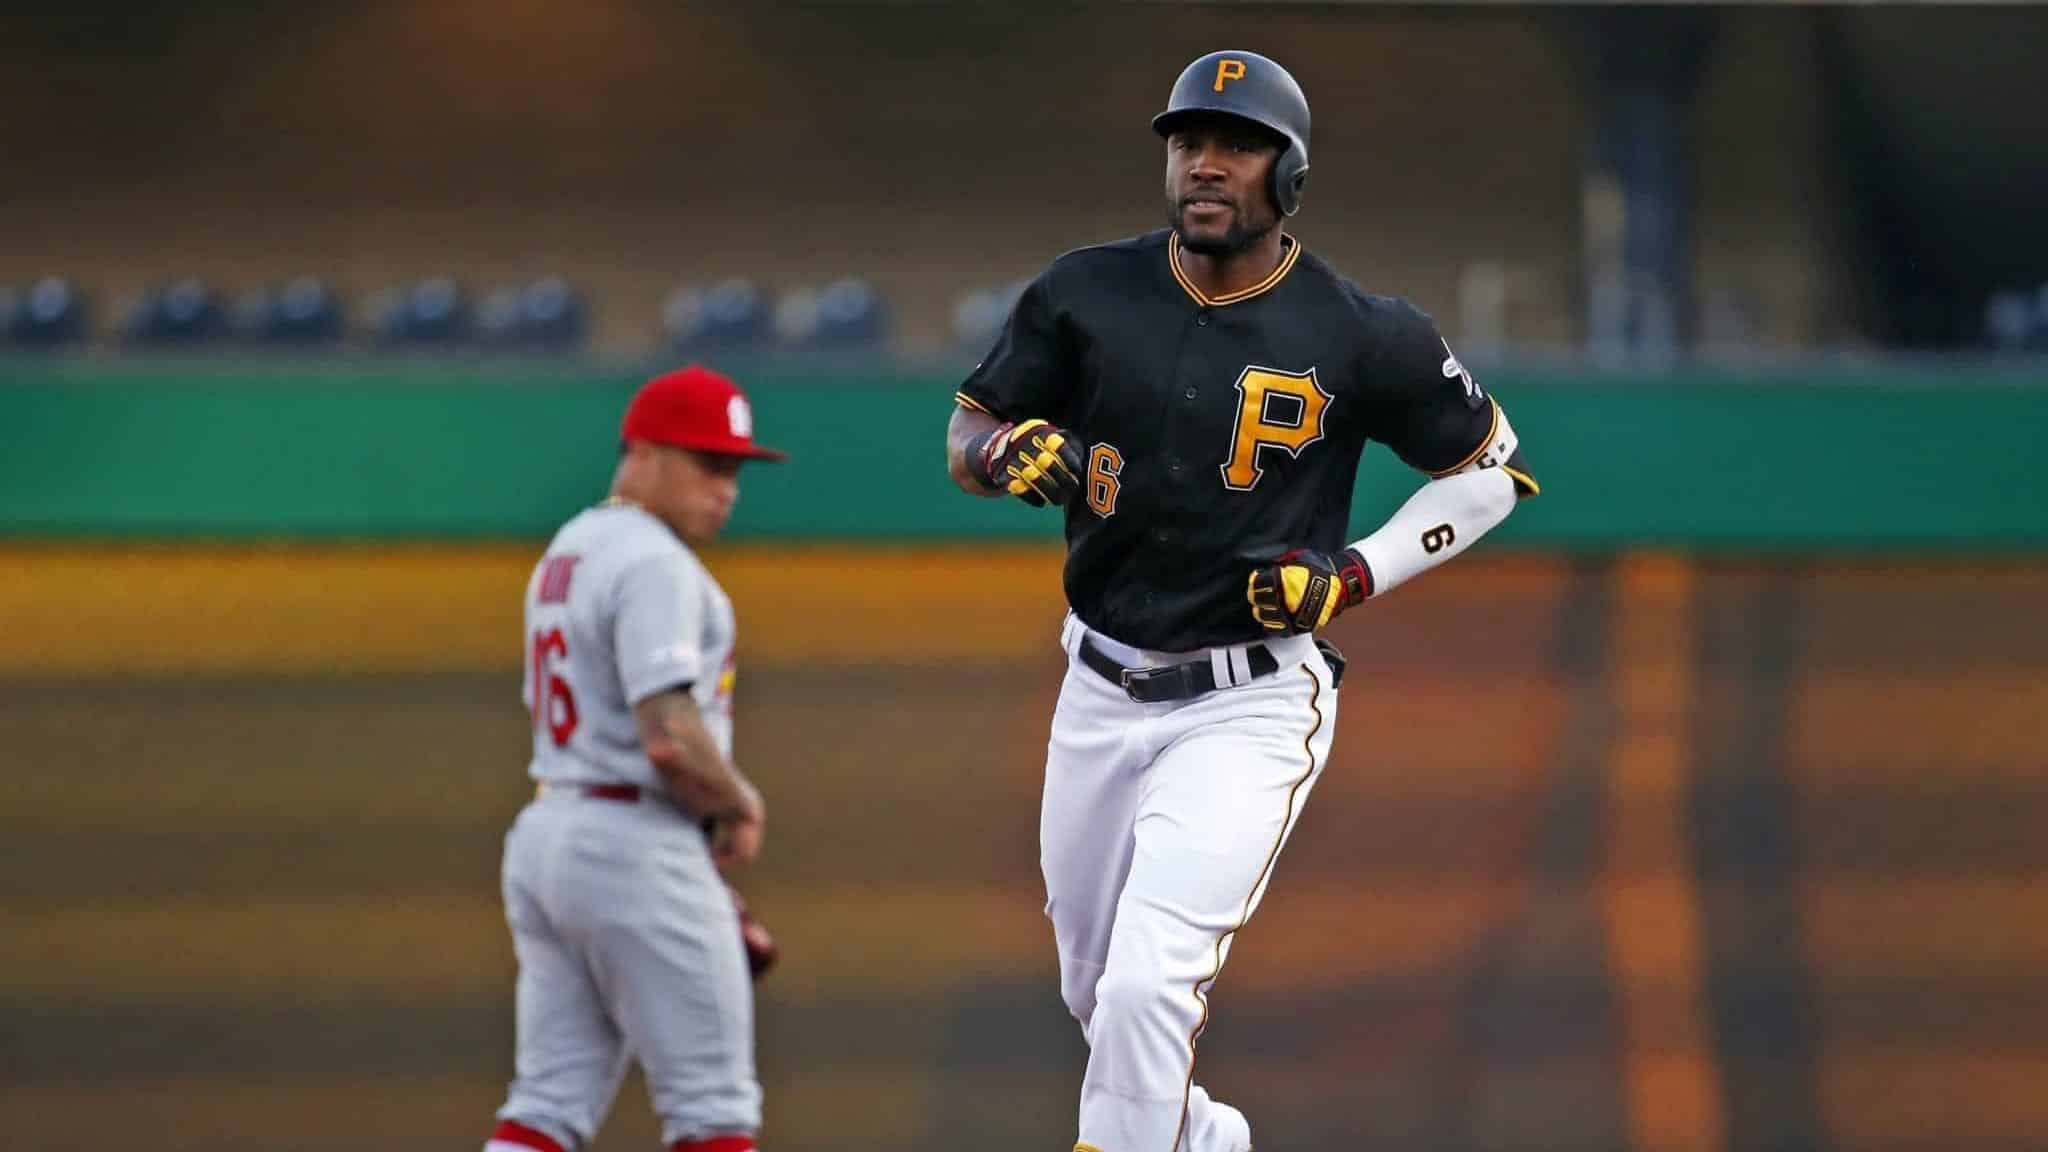 PITTSBURGH, PA - JULY 23: Starling Marte #6 of the Pittsburgh Pirates rounds second base after hitting a three-run home run in the first inning against the St. Louis Cardinals at PNC Park on July 23, 2019 in Pittsburgh, Pennsylvania.